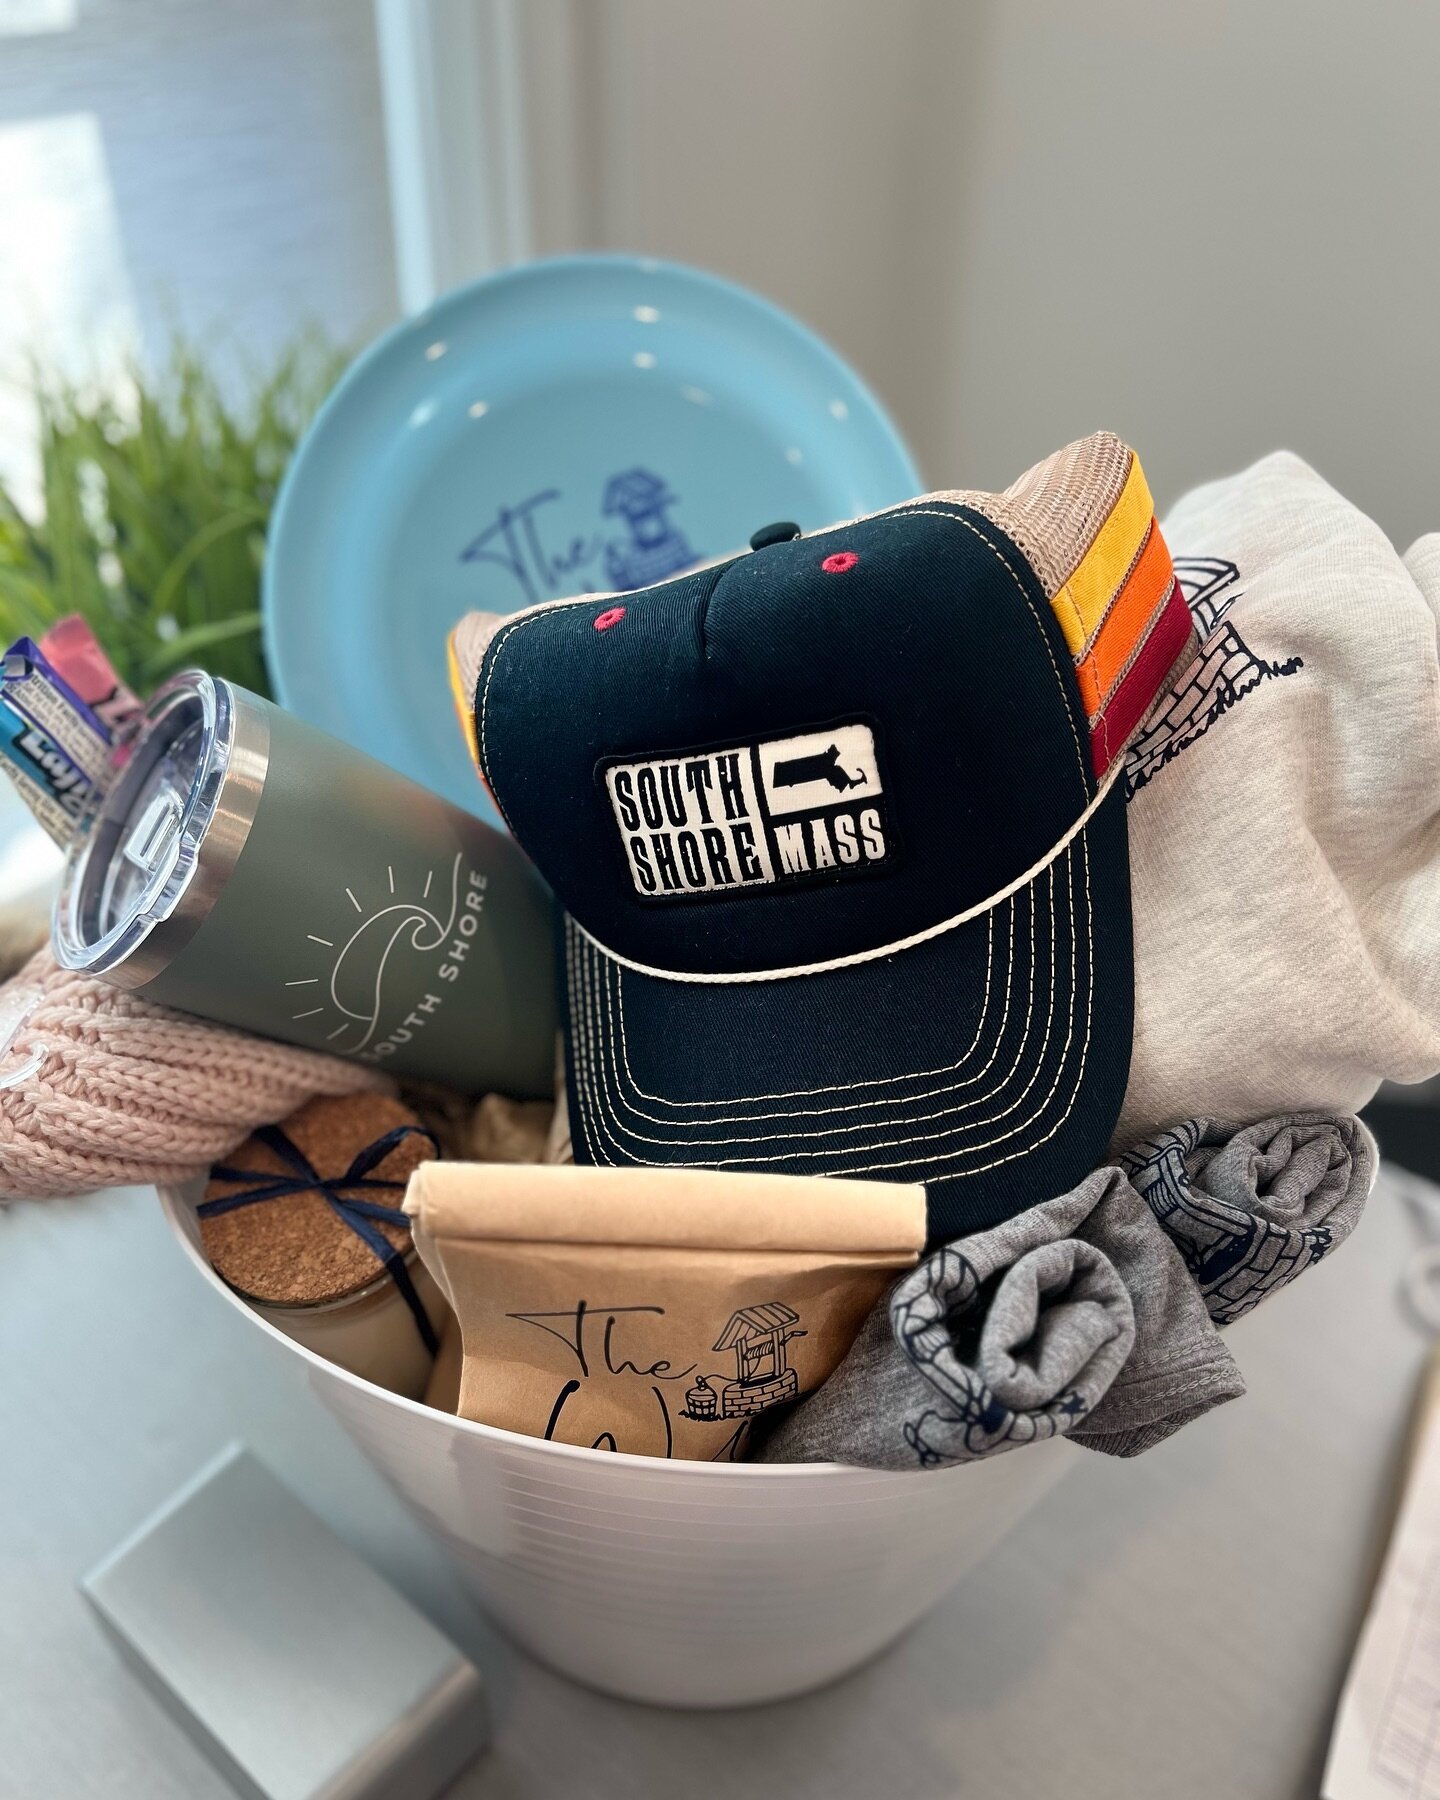 GIVEAWAY ALERT! 🌟 Embrace the cozy holiday  vibes with a fabulous gift basket from The Well! 🎁✨ Win a cute hat, mug, frisbee, some comfy clothes and more! 🧣🍬☕

To enter:
1️⃣ Like this post ❤️
2️⃣ Follow @melissamcnamararealtor and @thewellnorwell